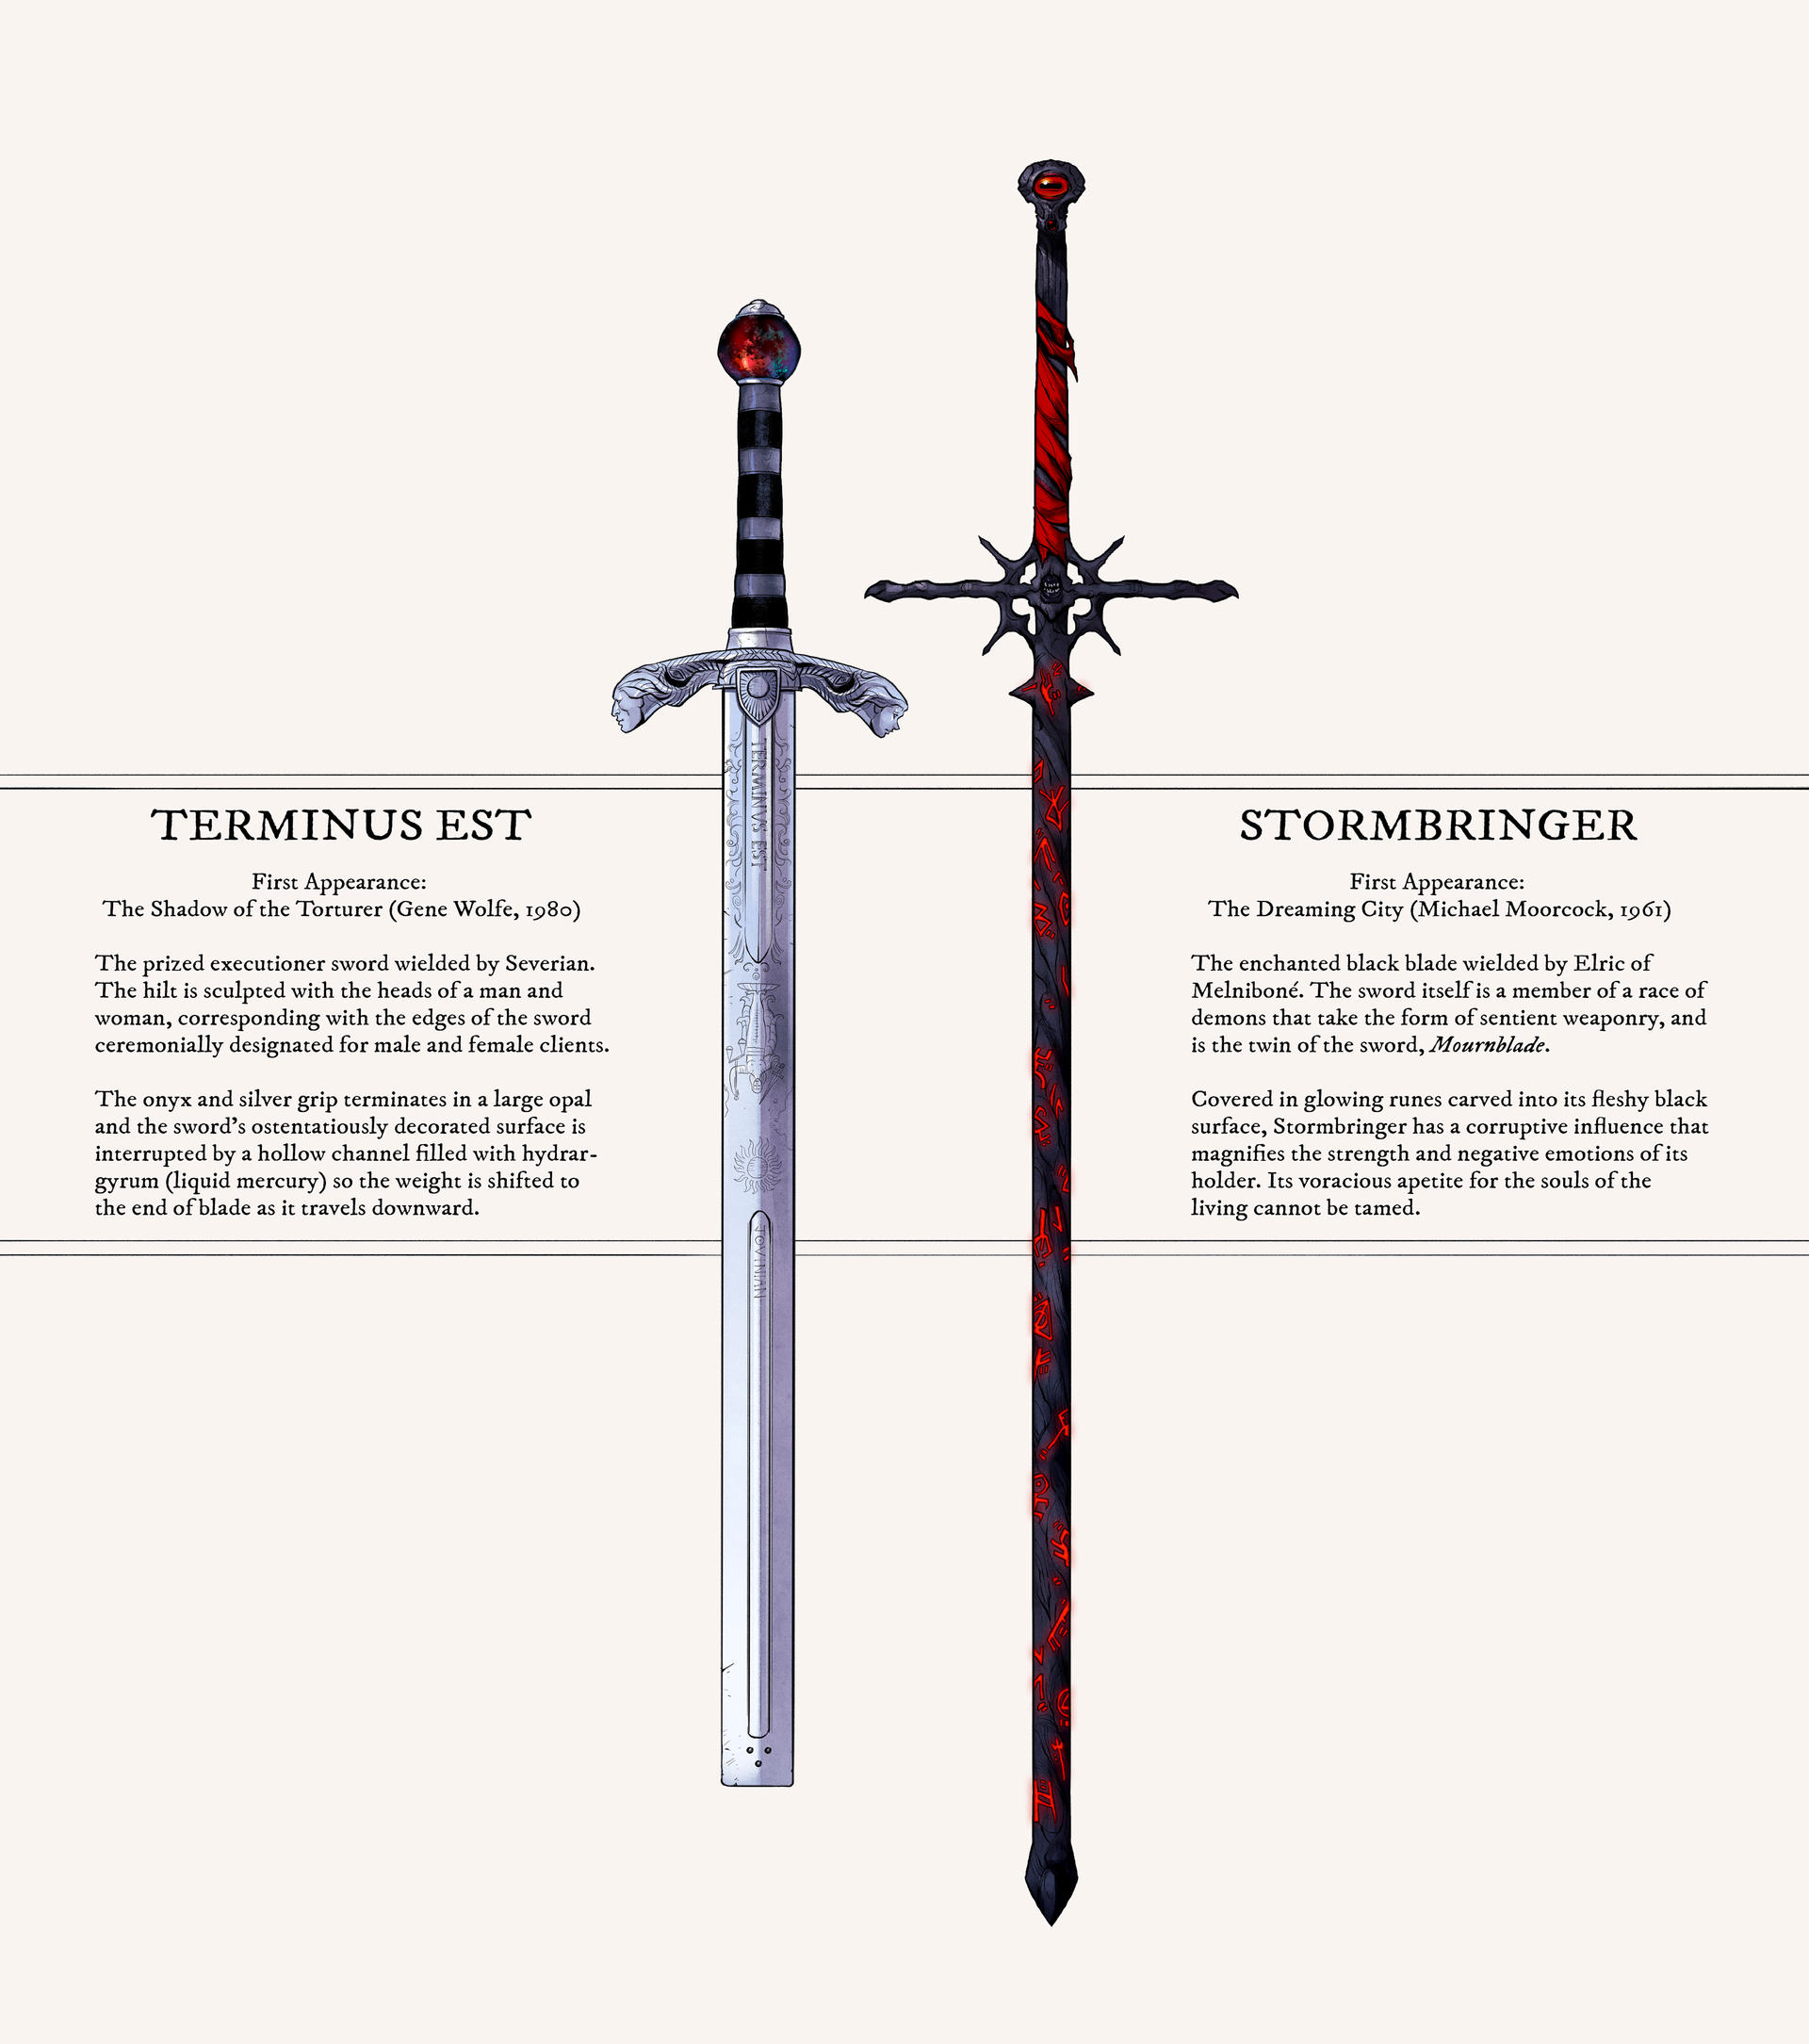 The Sword of the Stranger by Loneicon on DeviantArt